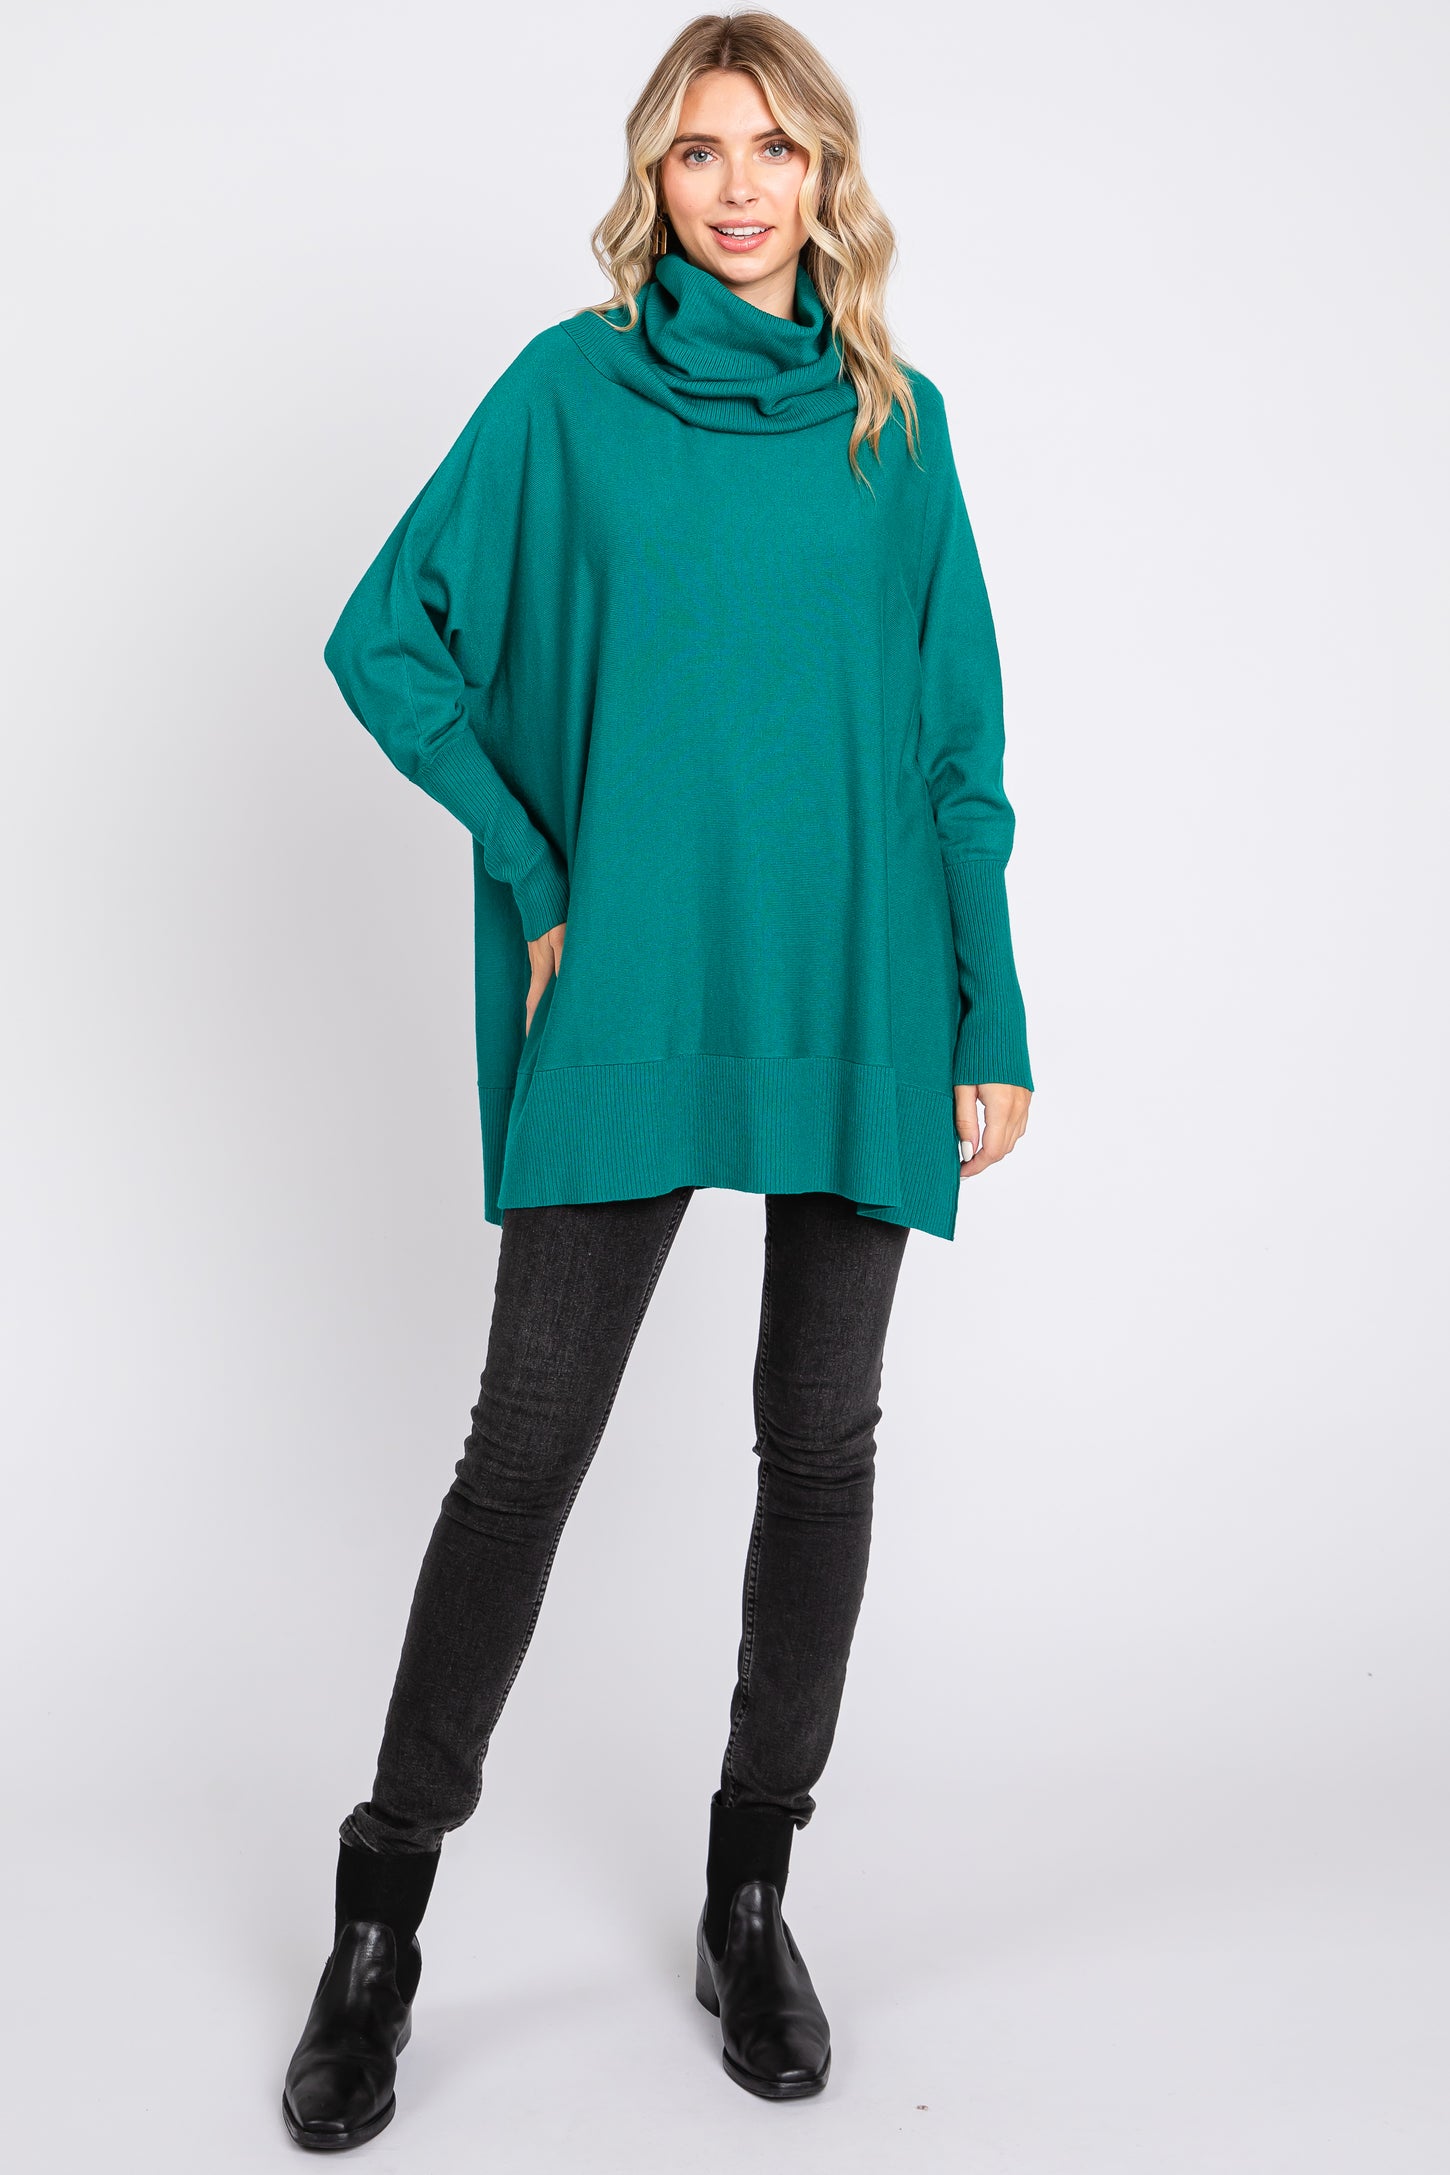 Forest Green Cowl Neck Dolman Sleeve Maternity Sweater